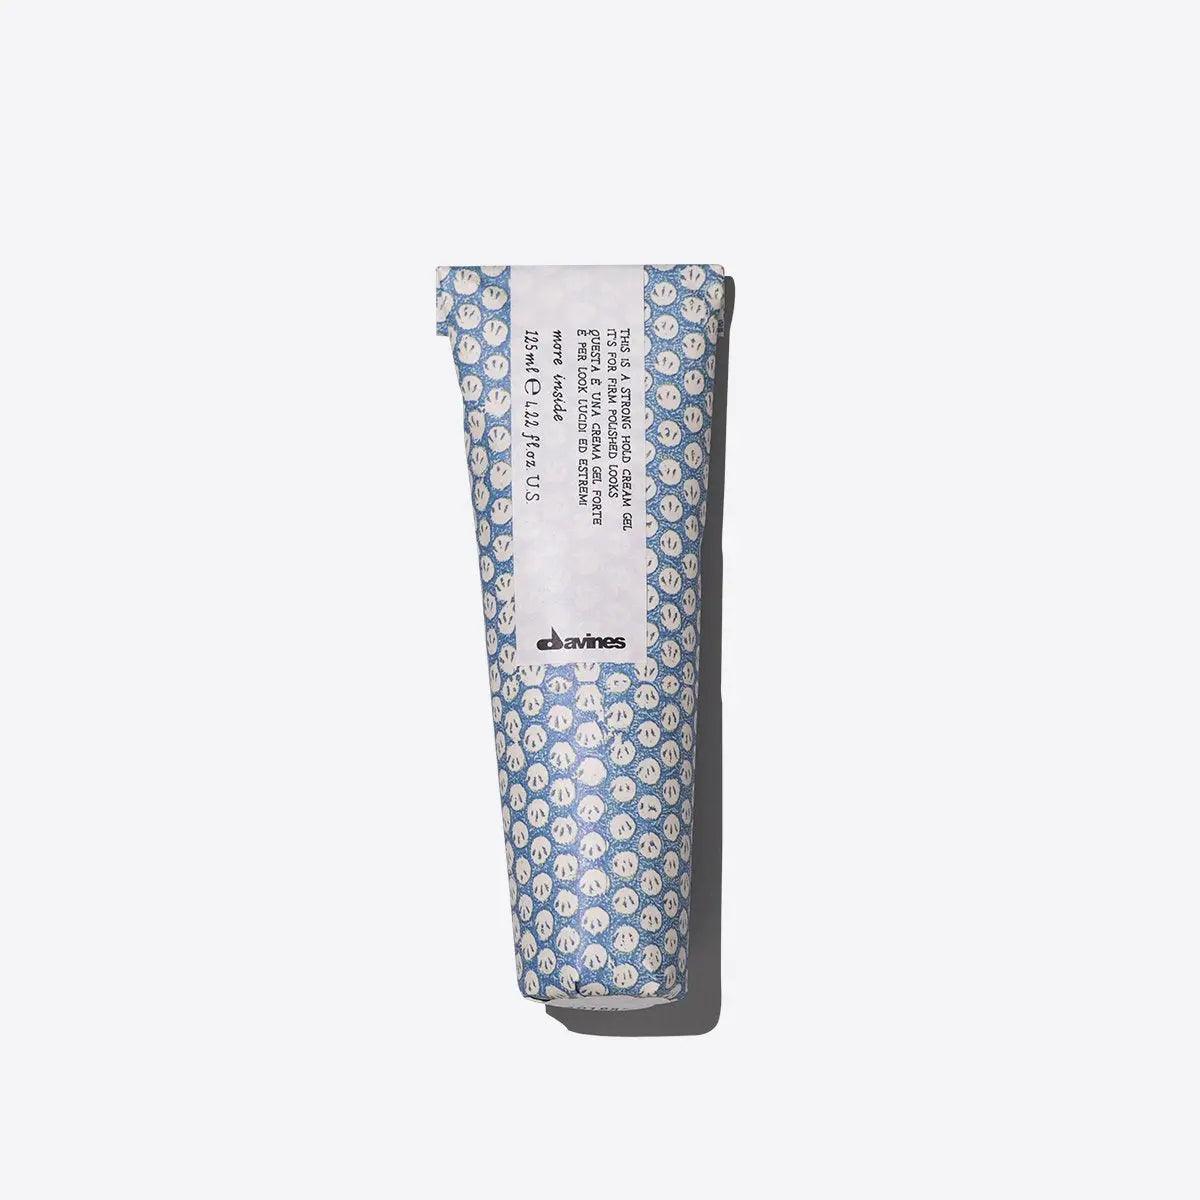 THIS IS A STRONG HOLD CREAM GEL Davines Boutique Deauville